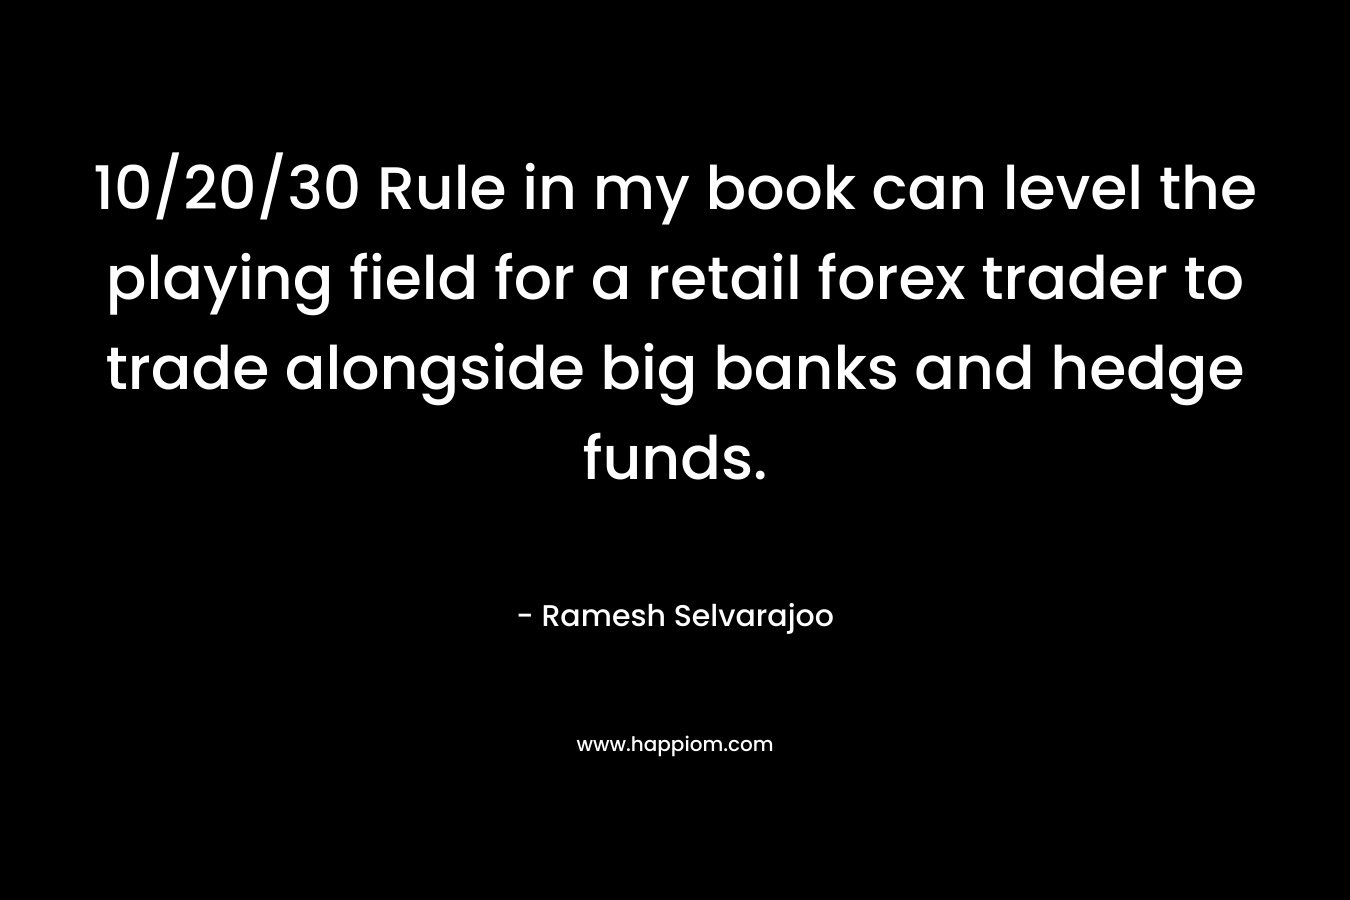 10/20/30 Rule in my book can level the playing field for a retail forex trader to trade alongside big banks and hedge funds.